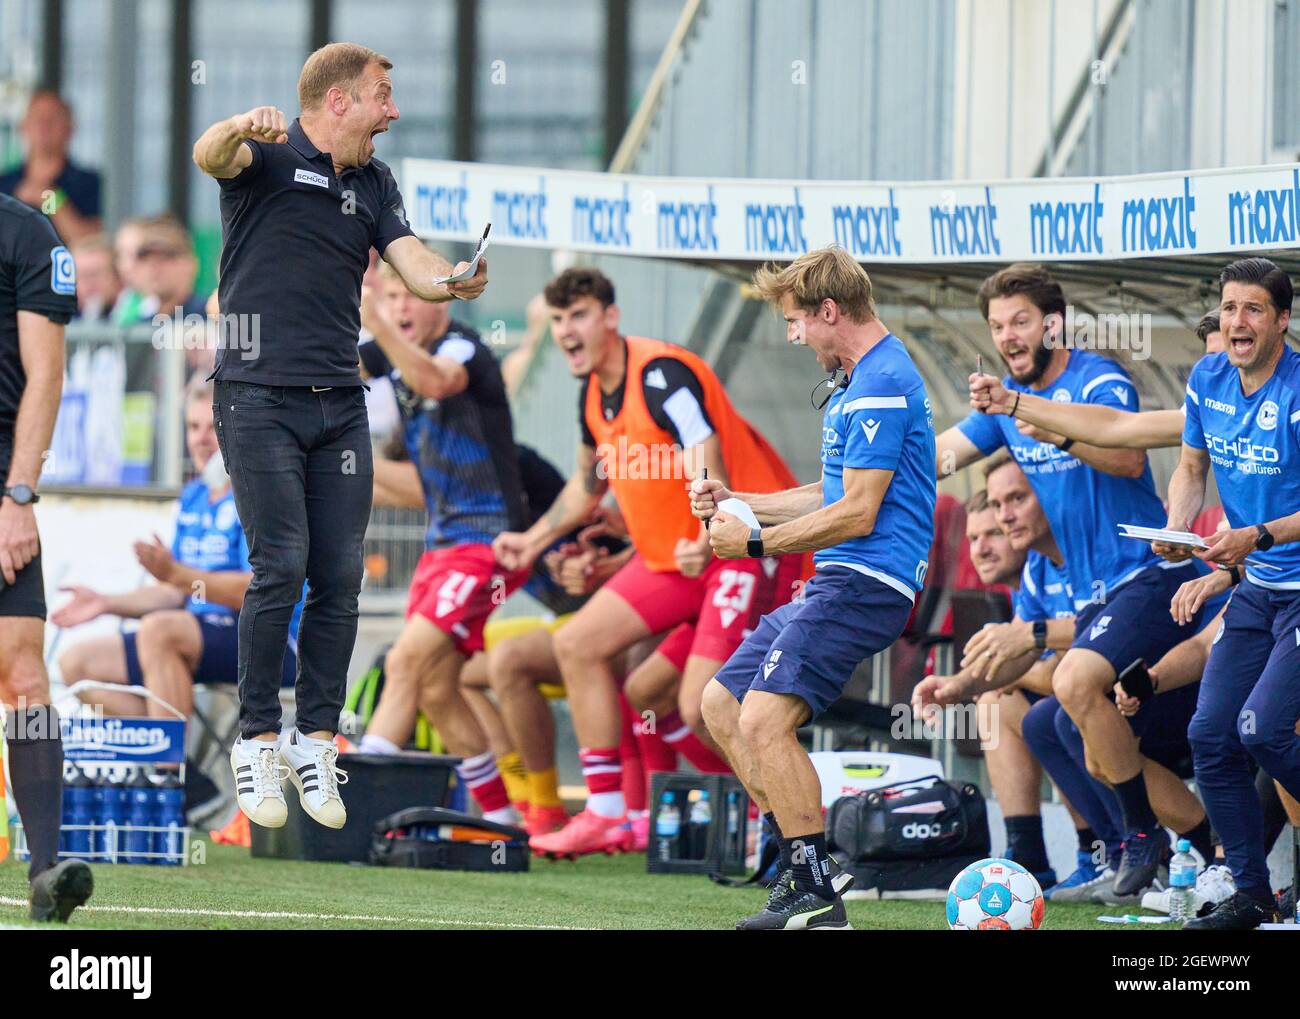 Frank Kramer, Bielefeld head coach, chef trainer, jump, celebrate 0-1 goal of Fabian Klos, Bielefeld Nr. 9  in the match SpVgg GREUTHER FUERTH - ARMINIA BIELEFELD 1-1 1.German Football League on August 21, 2021 in Fürth, Germany  Season 2021/2022, matchday 2, 1.Bundesliga, Fürth, 2.Spieltag. © Peter Schatz / Alamy Live News    - DFL REGULATIONS PROHIBIT ANY USE OF PHOTOGRAPHS as IMAGE SEQUENCES and/or QUASI-VIDEO - Stock Photo